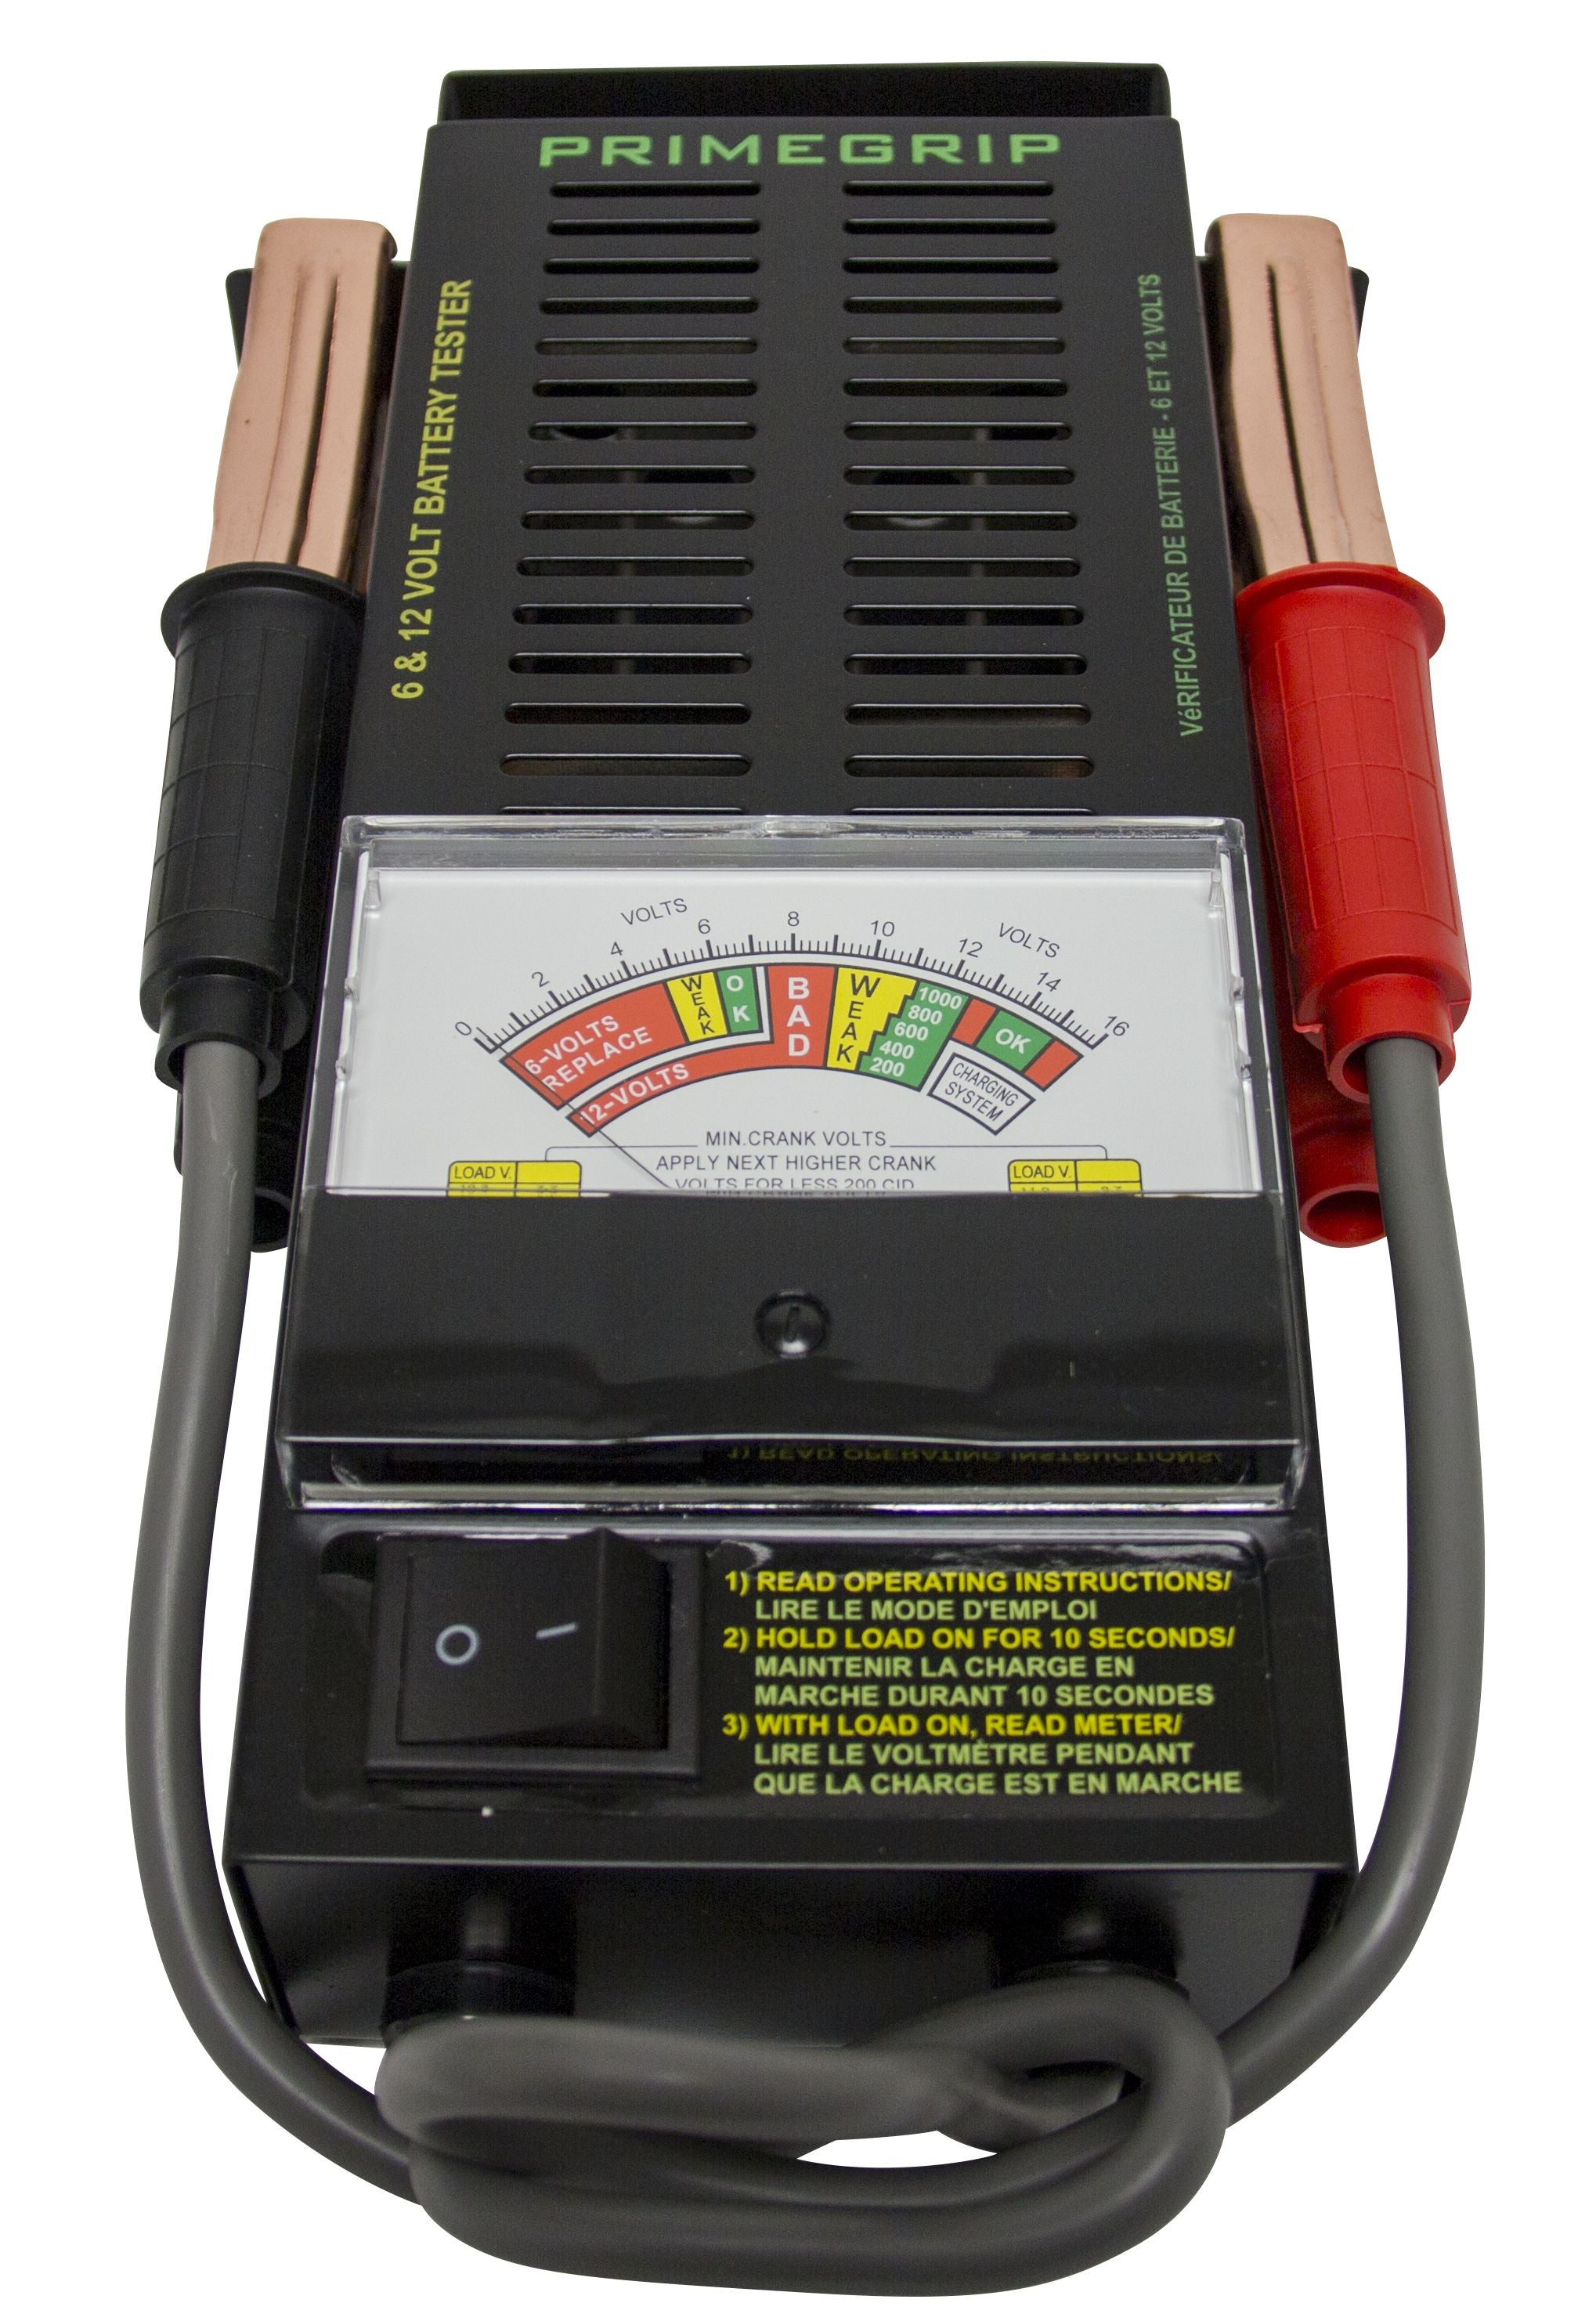 Battery Tester 6/12 Volts, 100 AMP